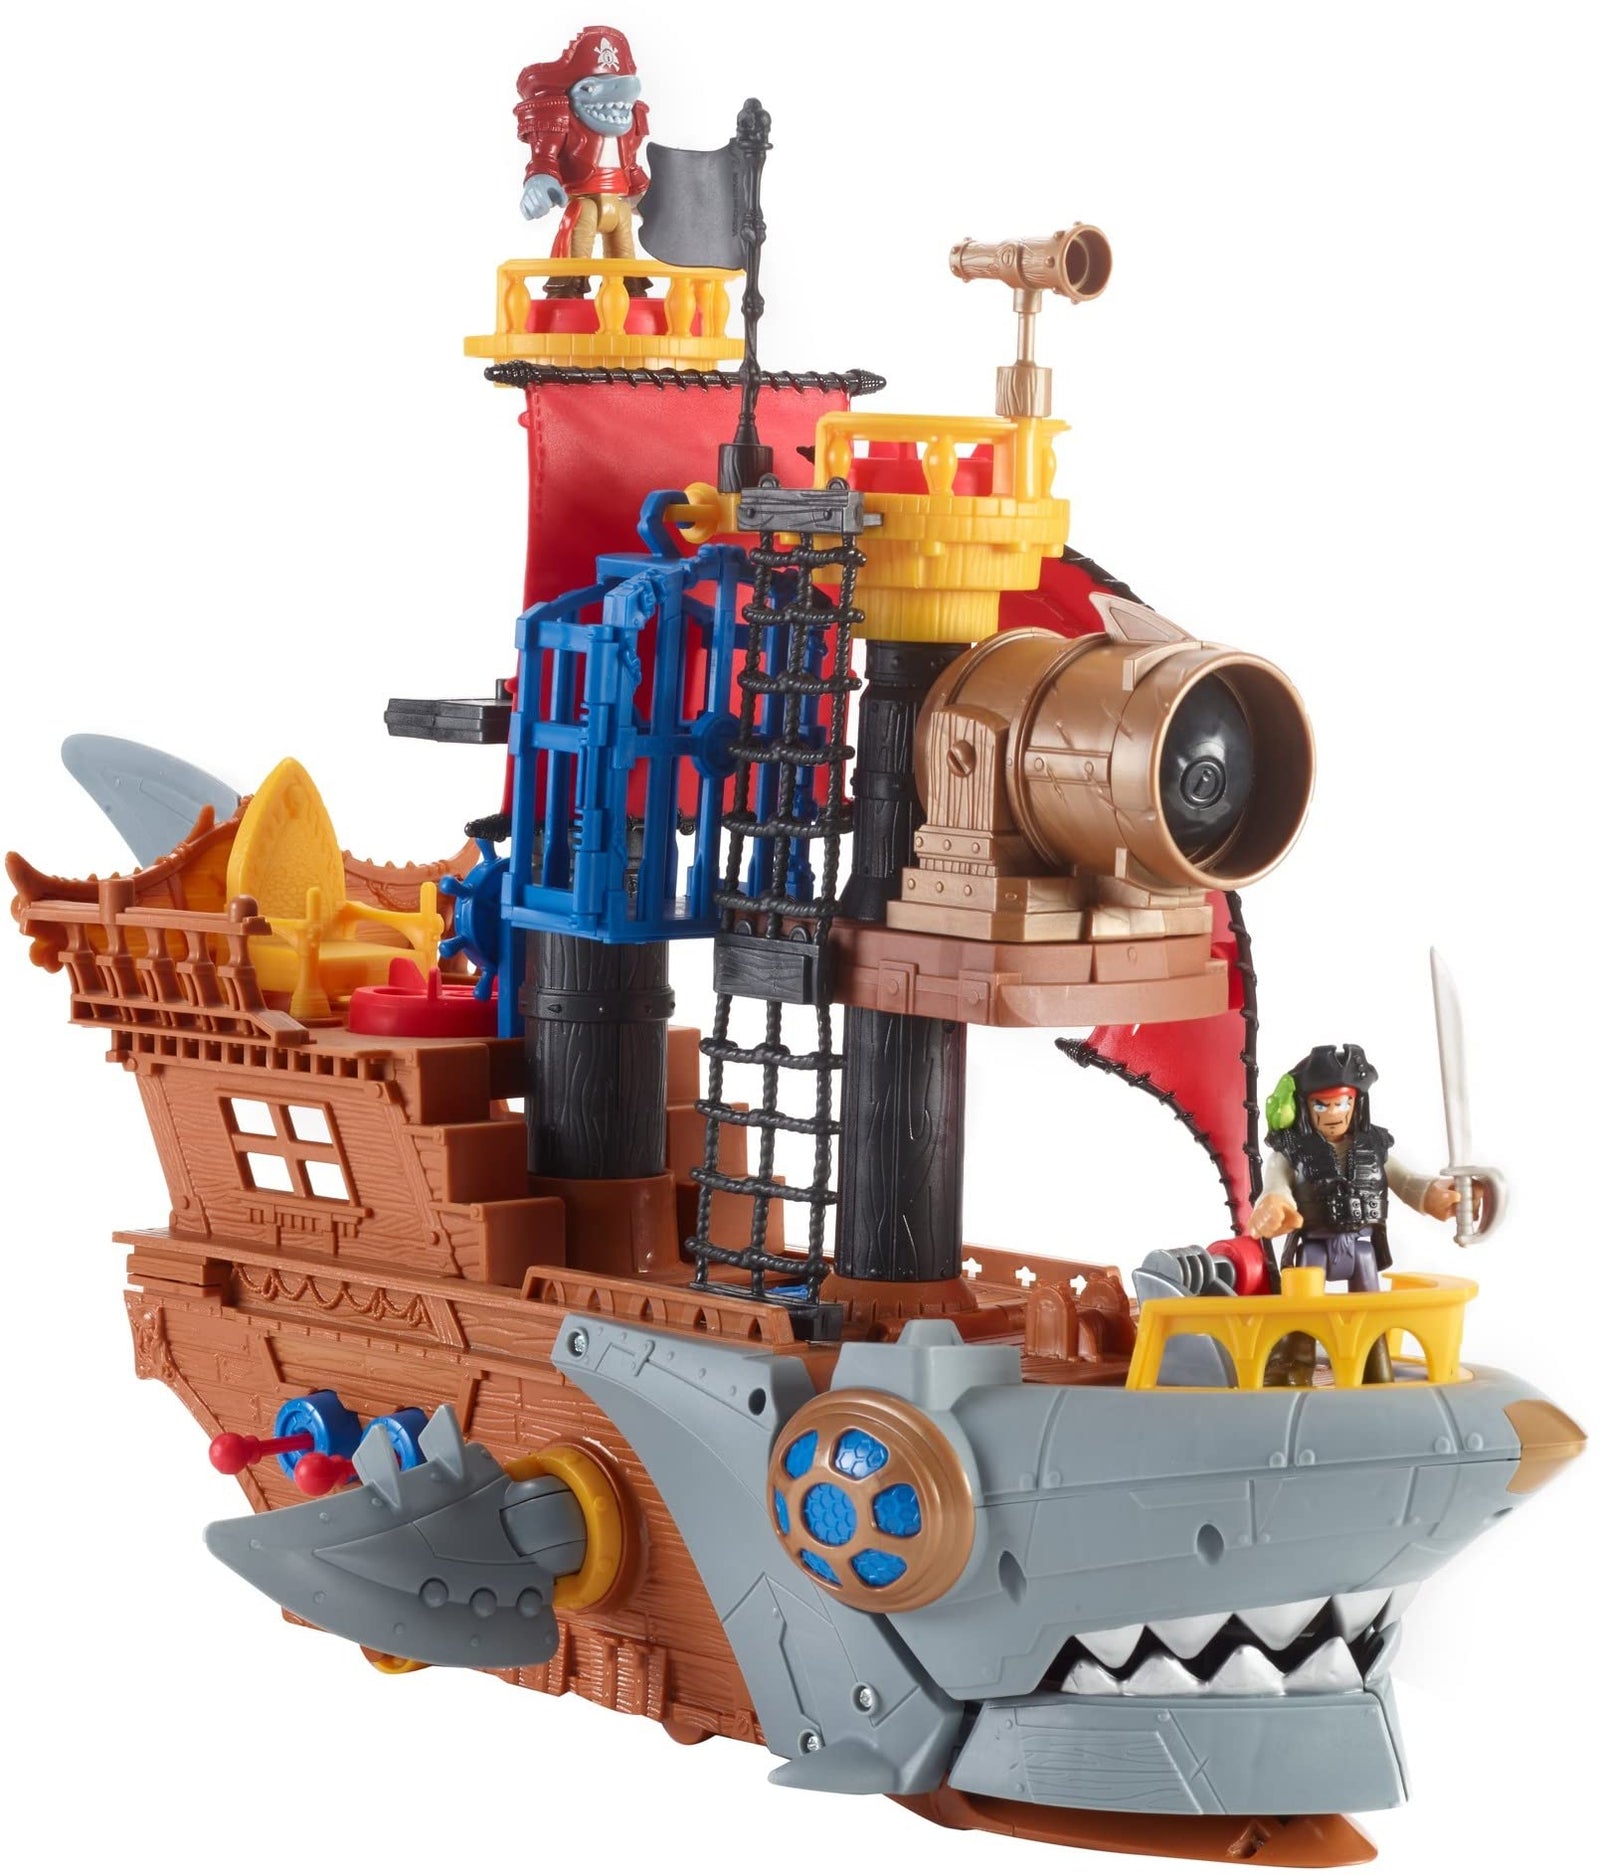 Fisher-Price Imaginext Shark Bite Pirate Ship, Playset with Pirate Figures and Accessories for Preschool Kids Ages 3 to 8 Years